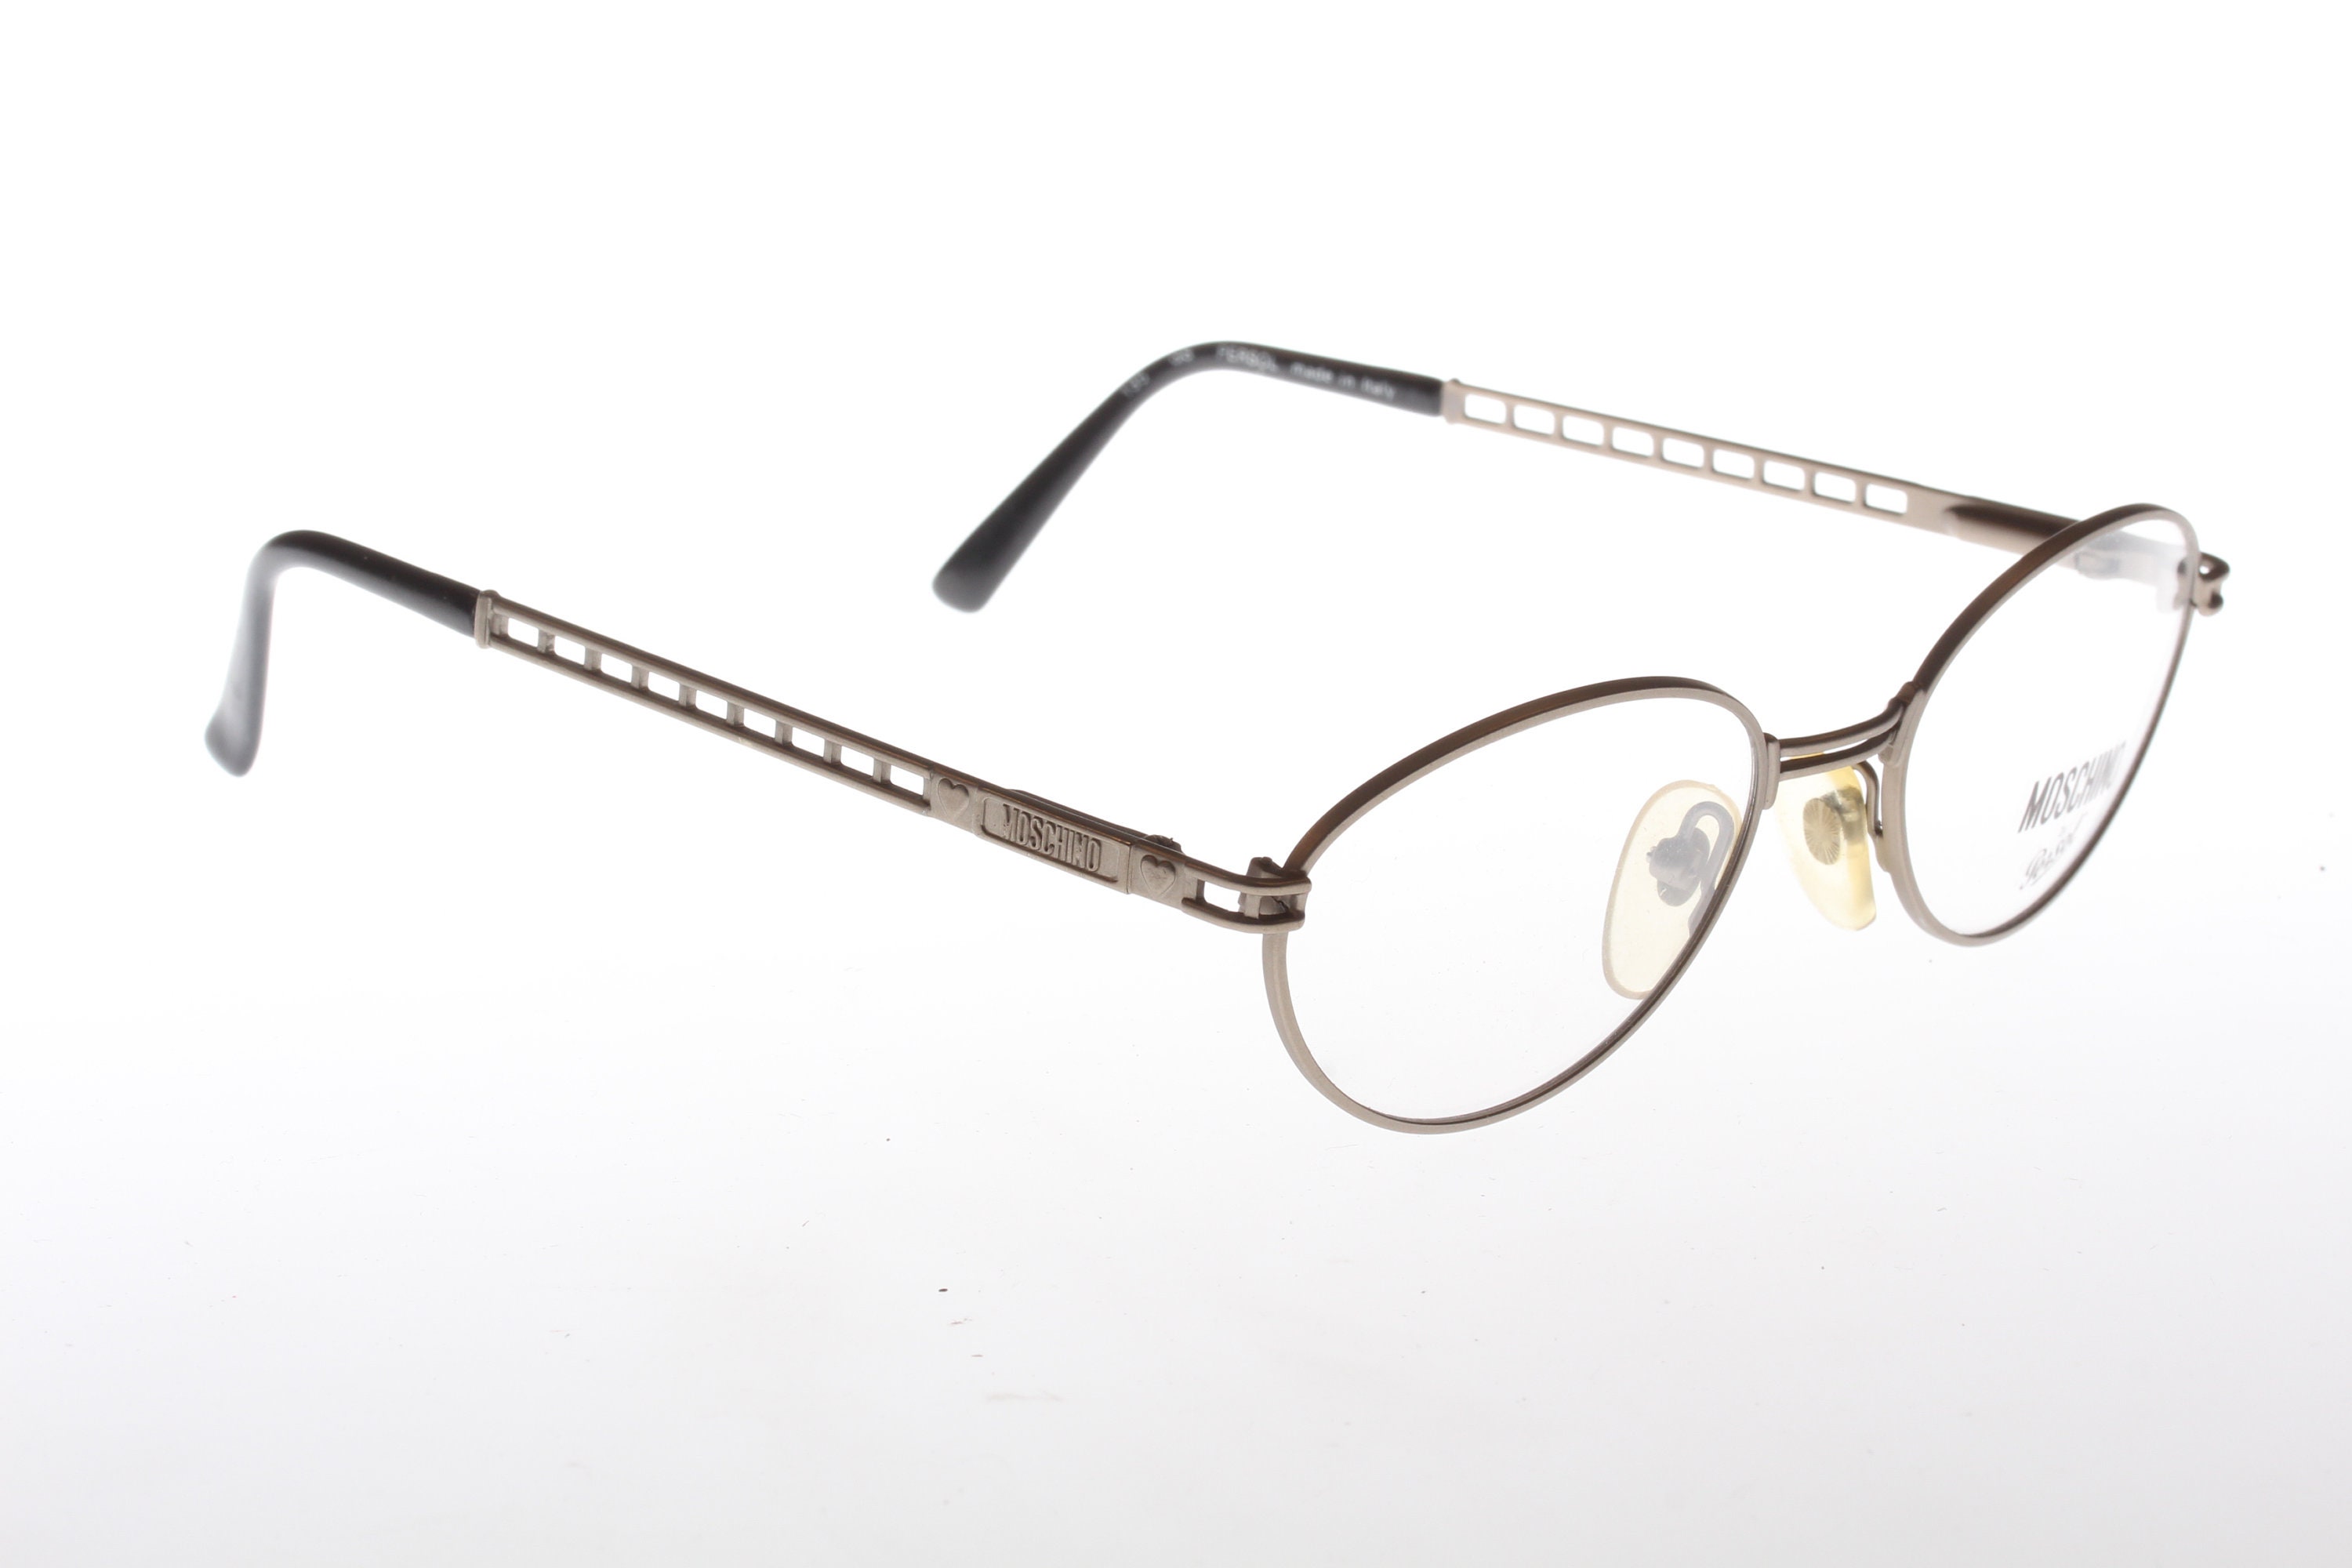 Moschino by Persol MM545 Vintage Eyeglasses -  Canada